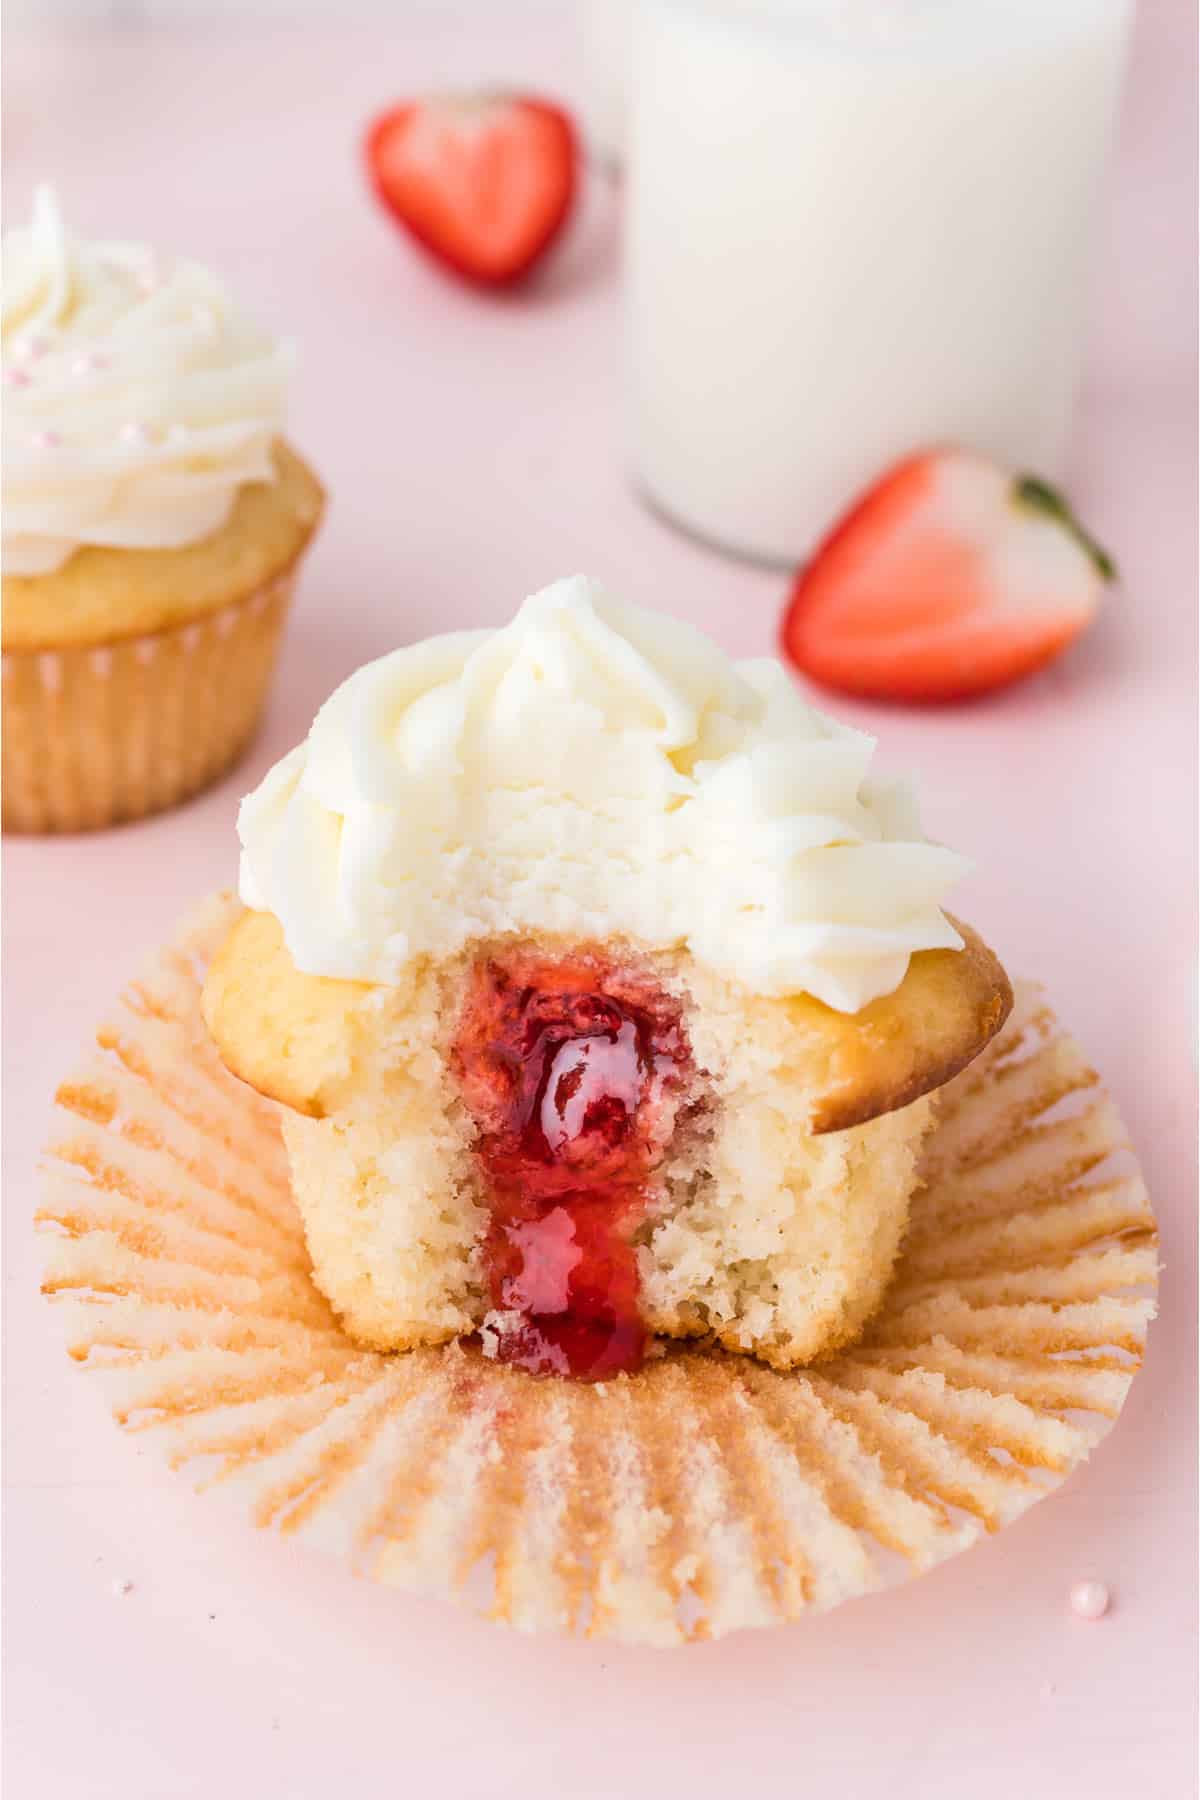 Strawberry cupcake on a paper liner with a bite missing.